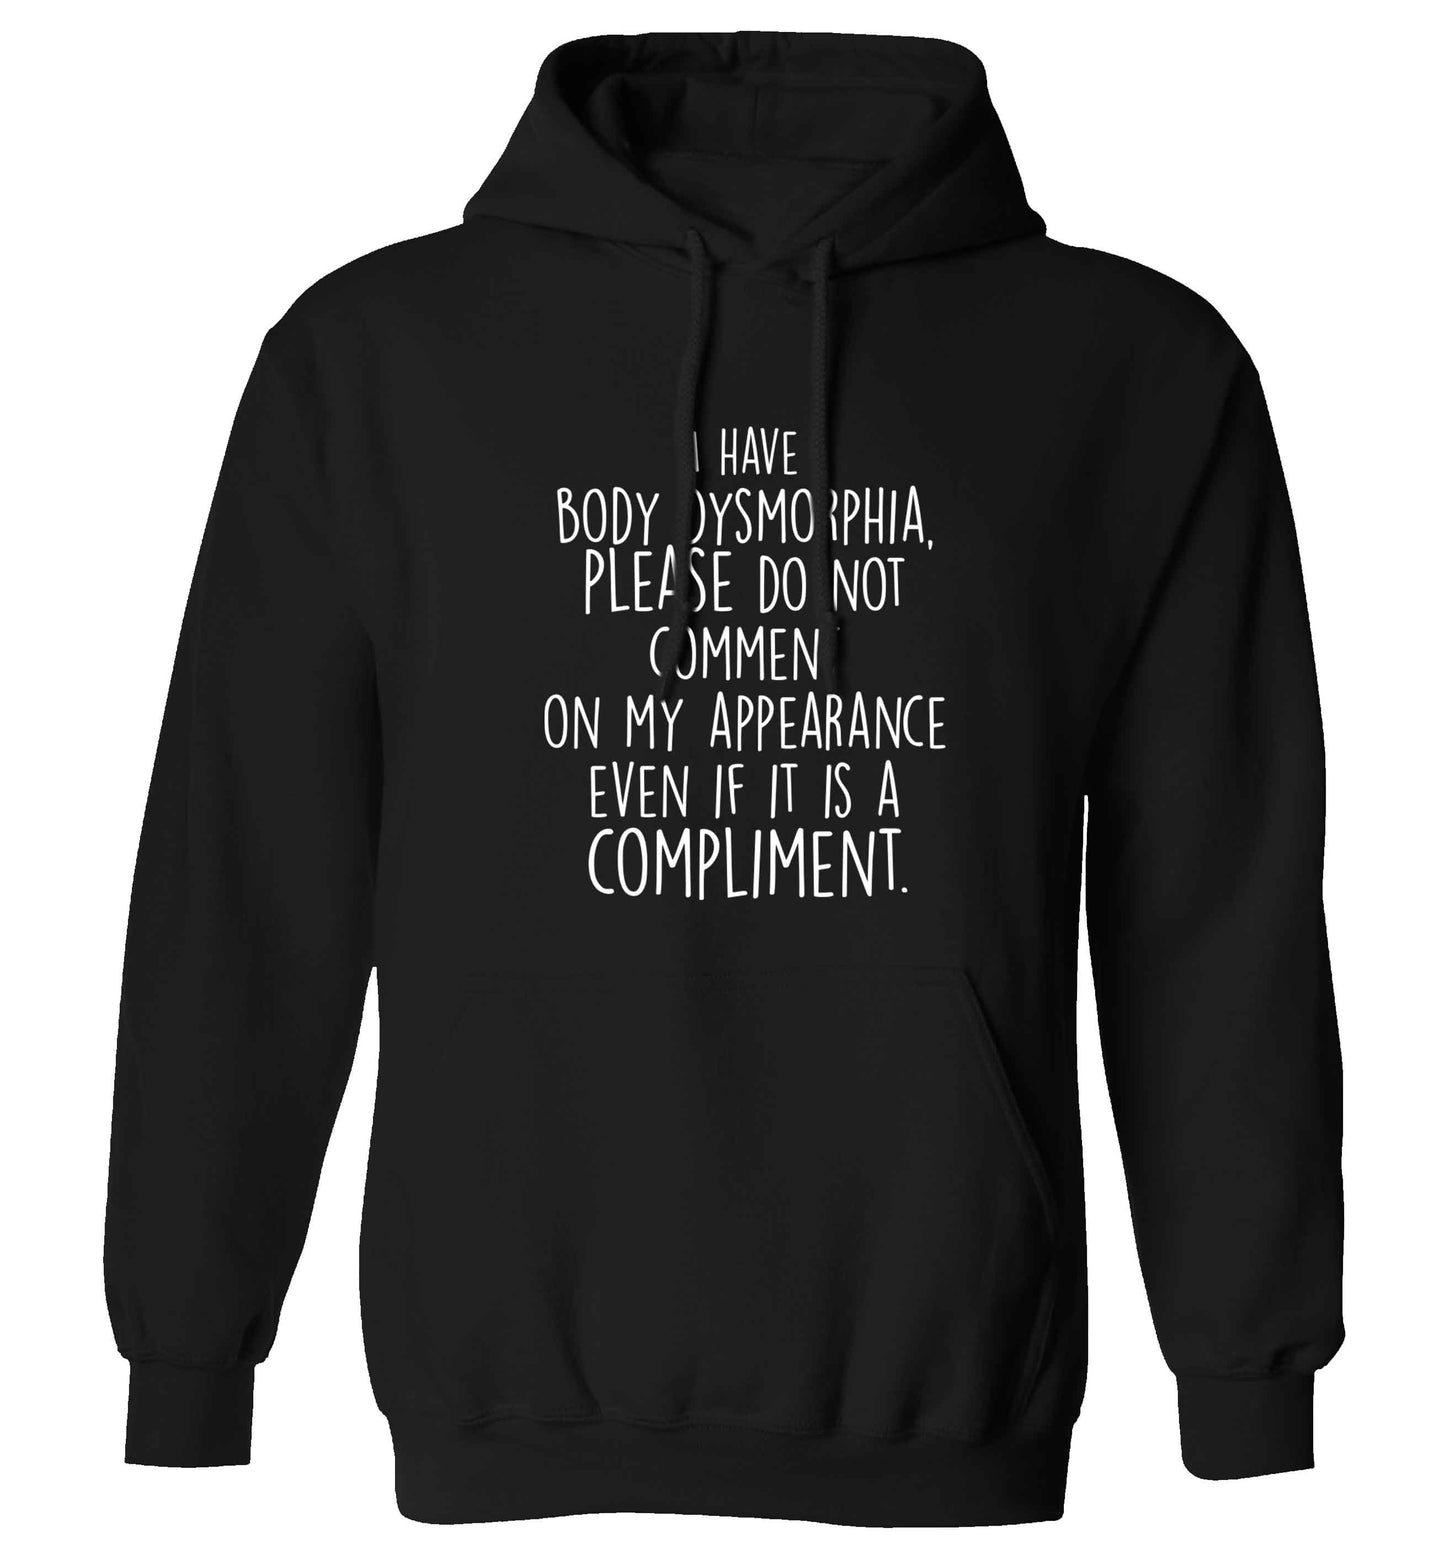 I have body dysmorphia, please do not comment on my appearance even if it is a compliment adults unisex black hoodie 2XL